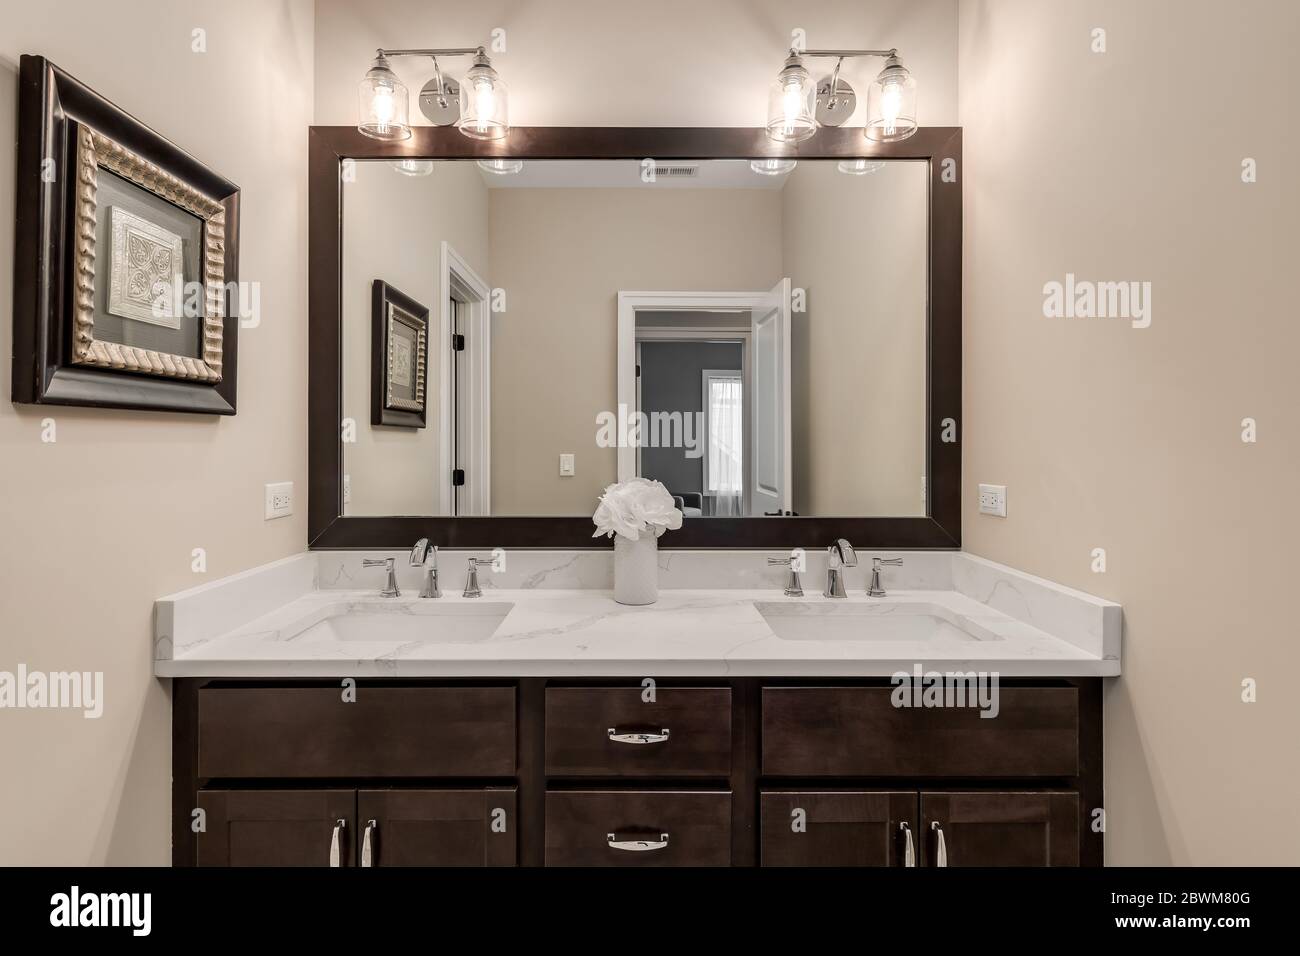 A Small Bathroom With A Dark Vanity And Cream Colored Granite Counter Top Stock Photo Alamy